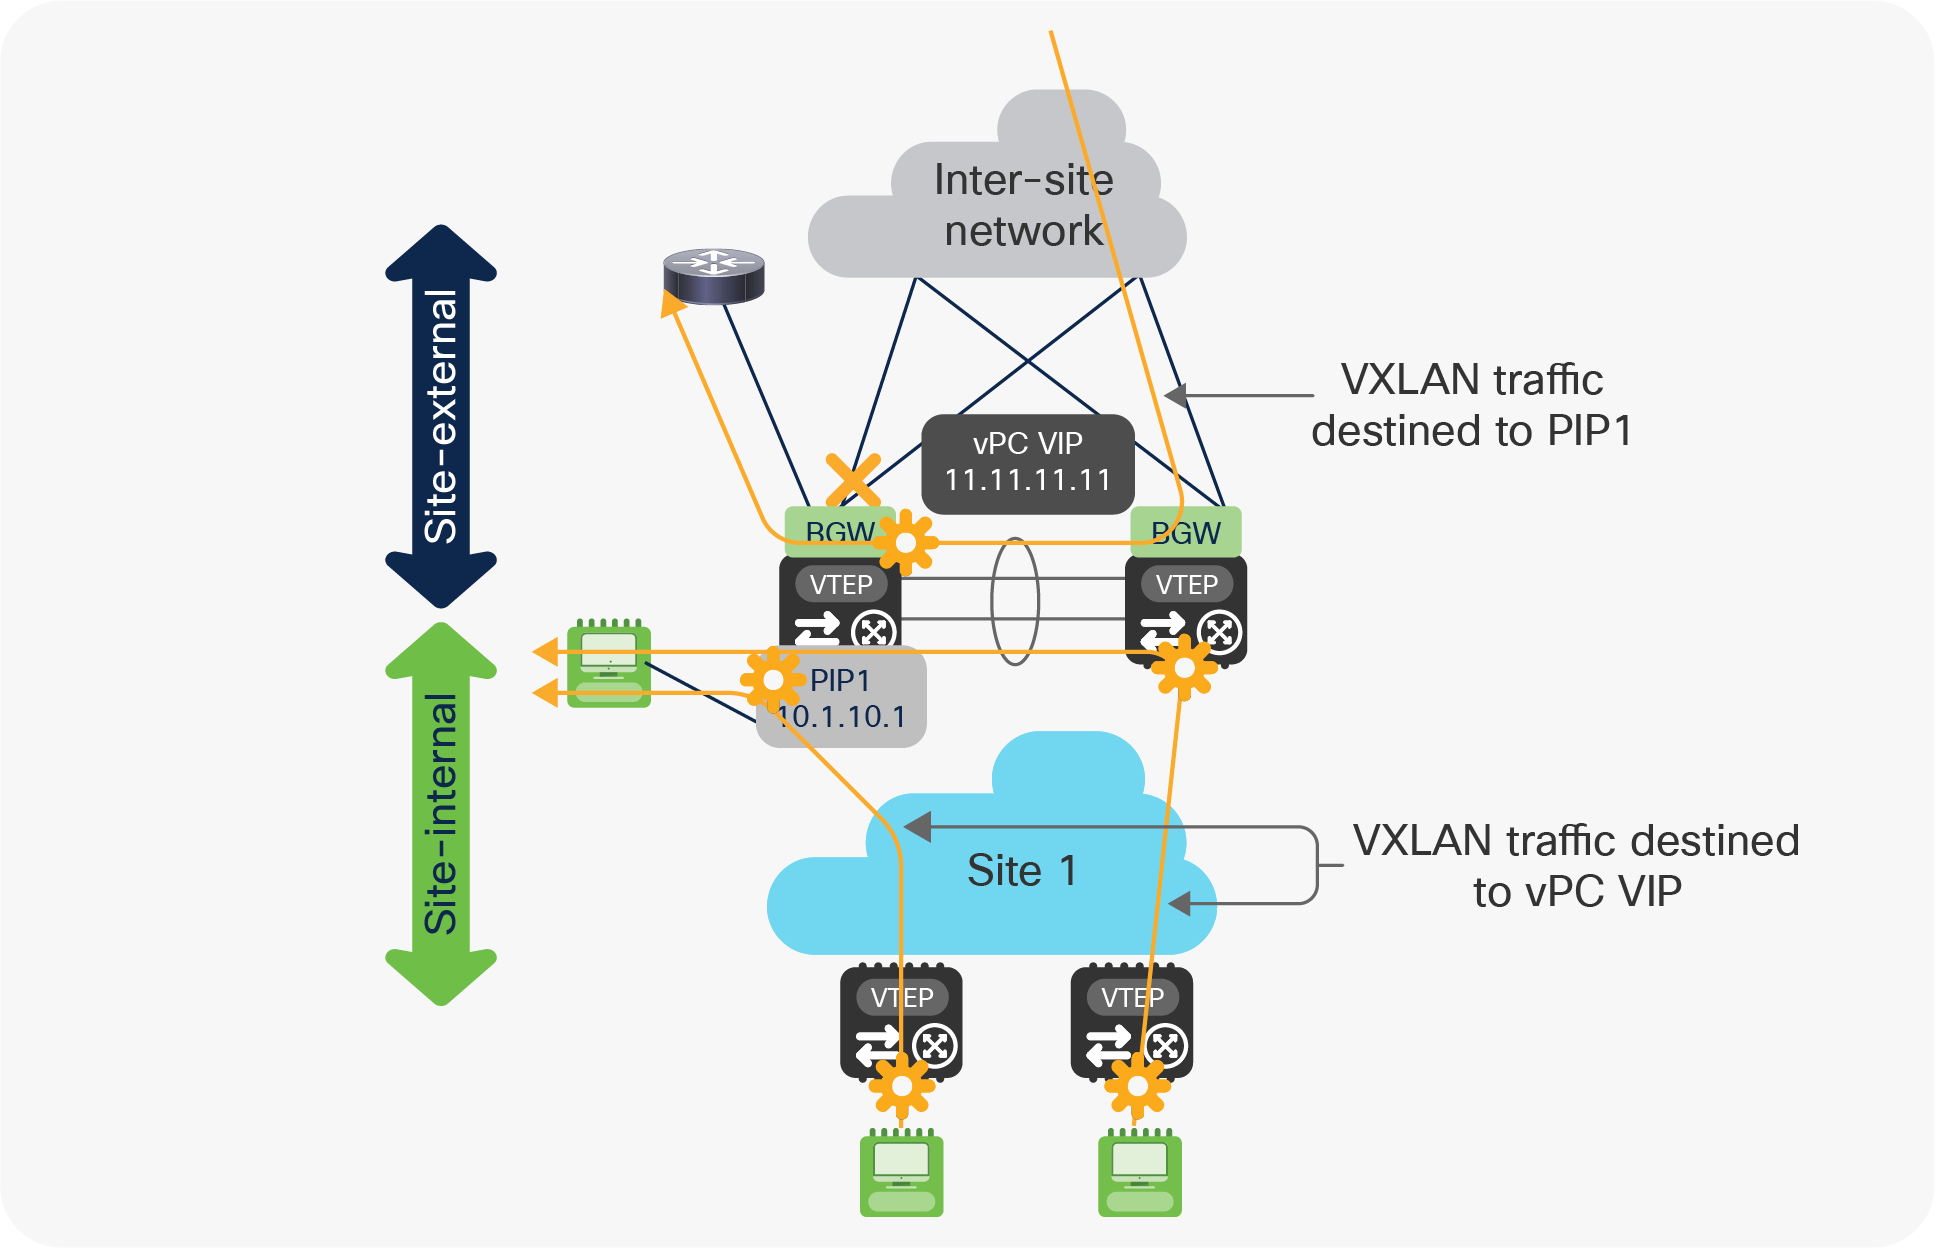 Use of PIP and vPC VIP addresses on the isolated BGW node